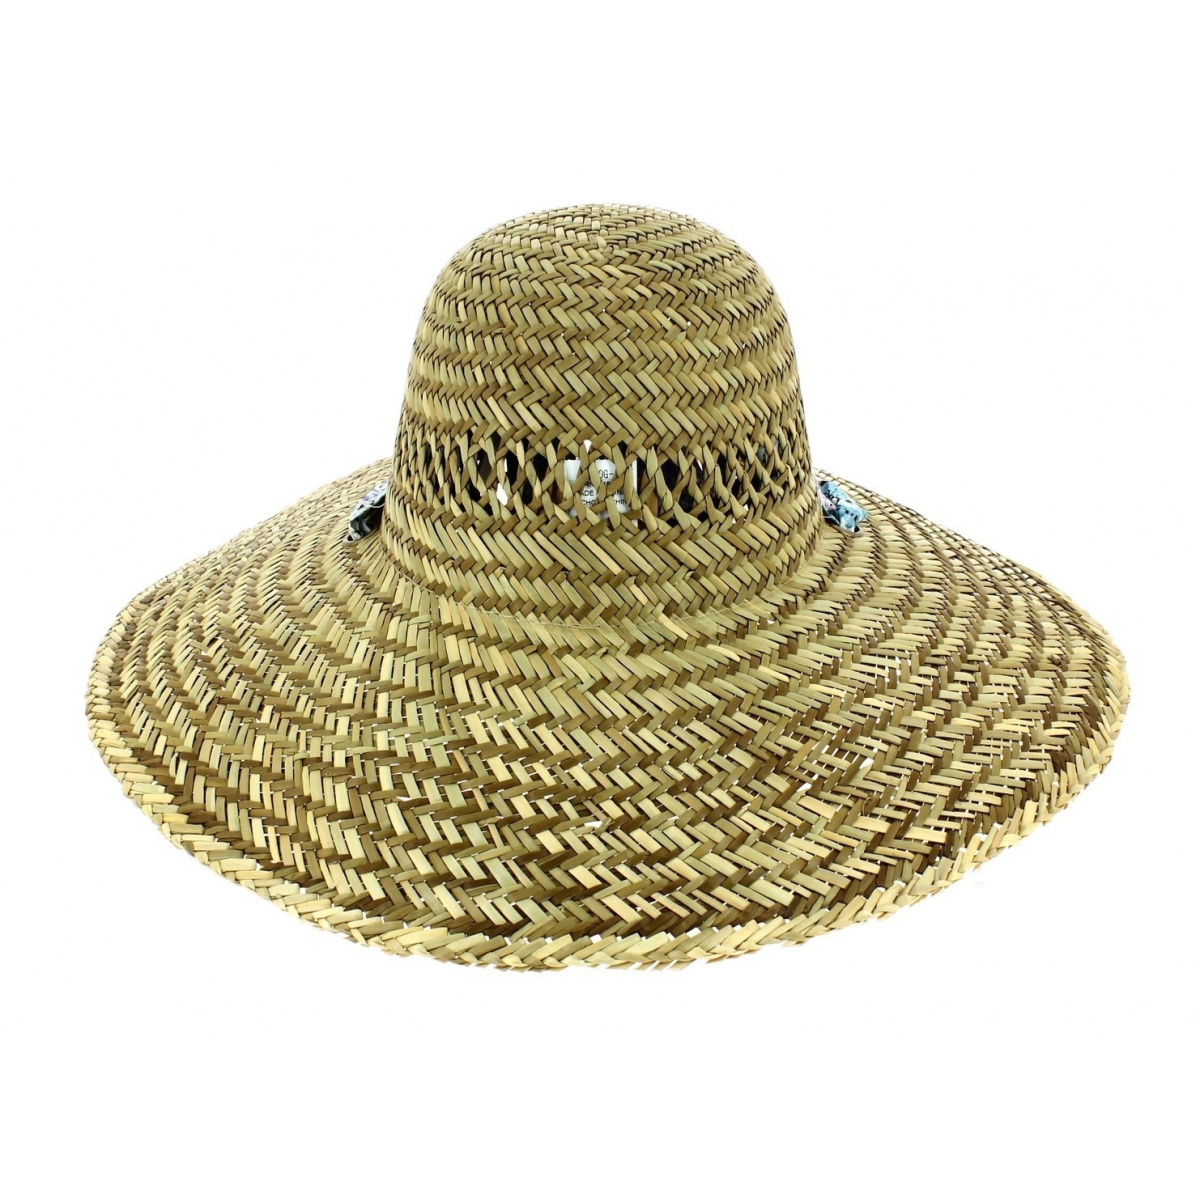 Tropical Natural Straw floppy hat - Dorfman Pacific Reference : 6566 ...